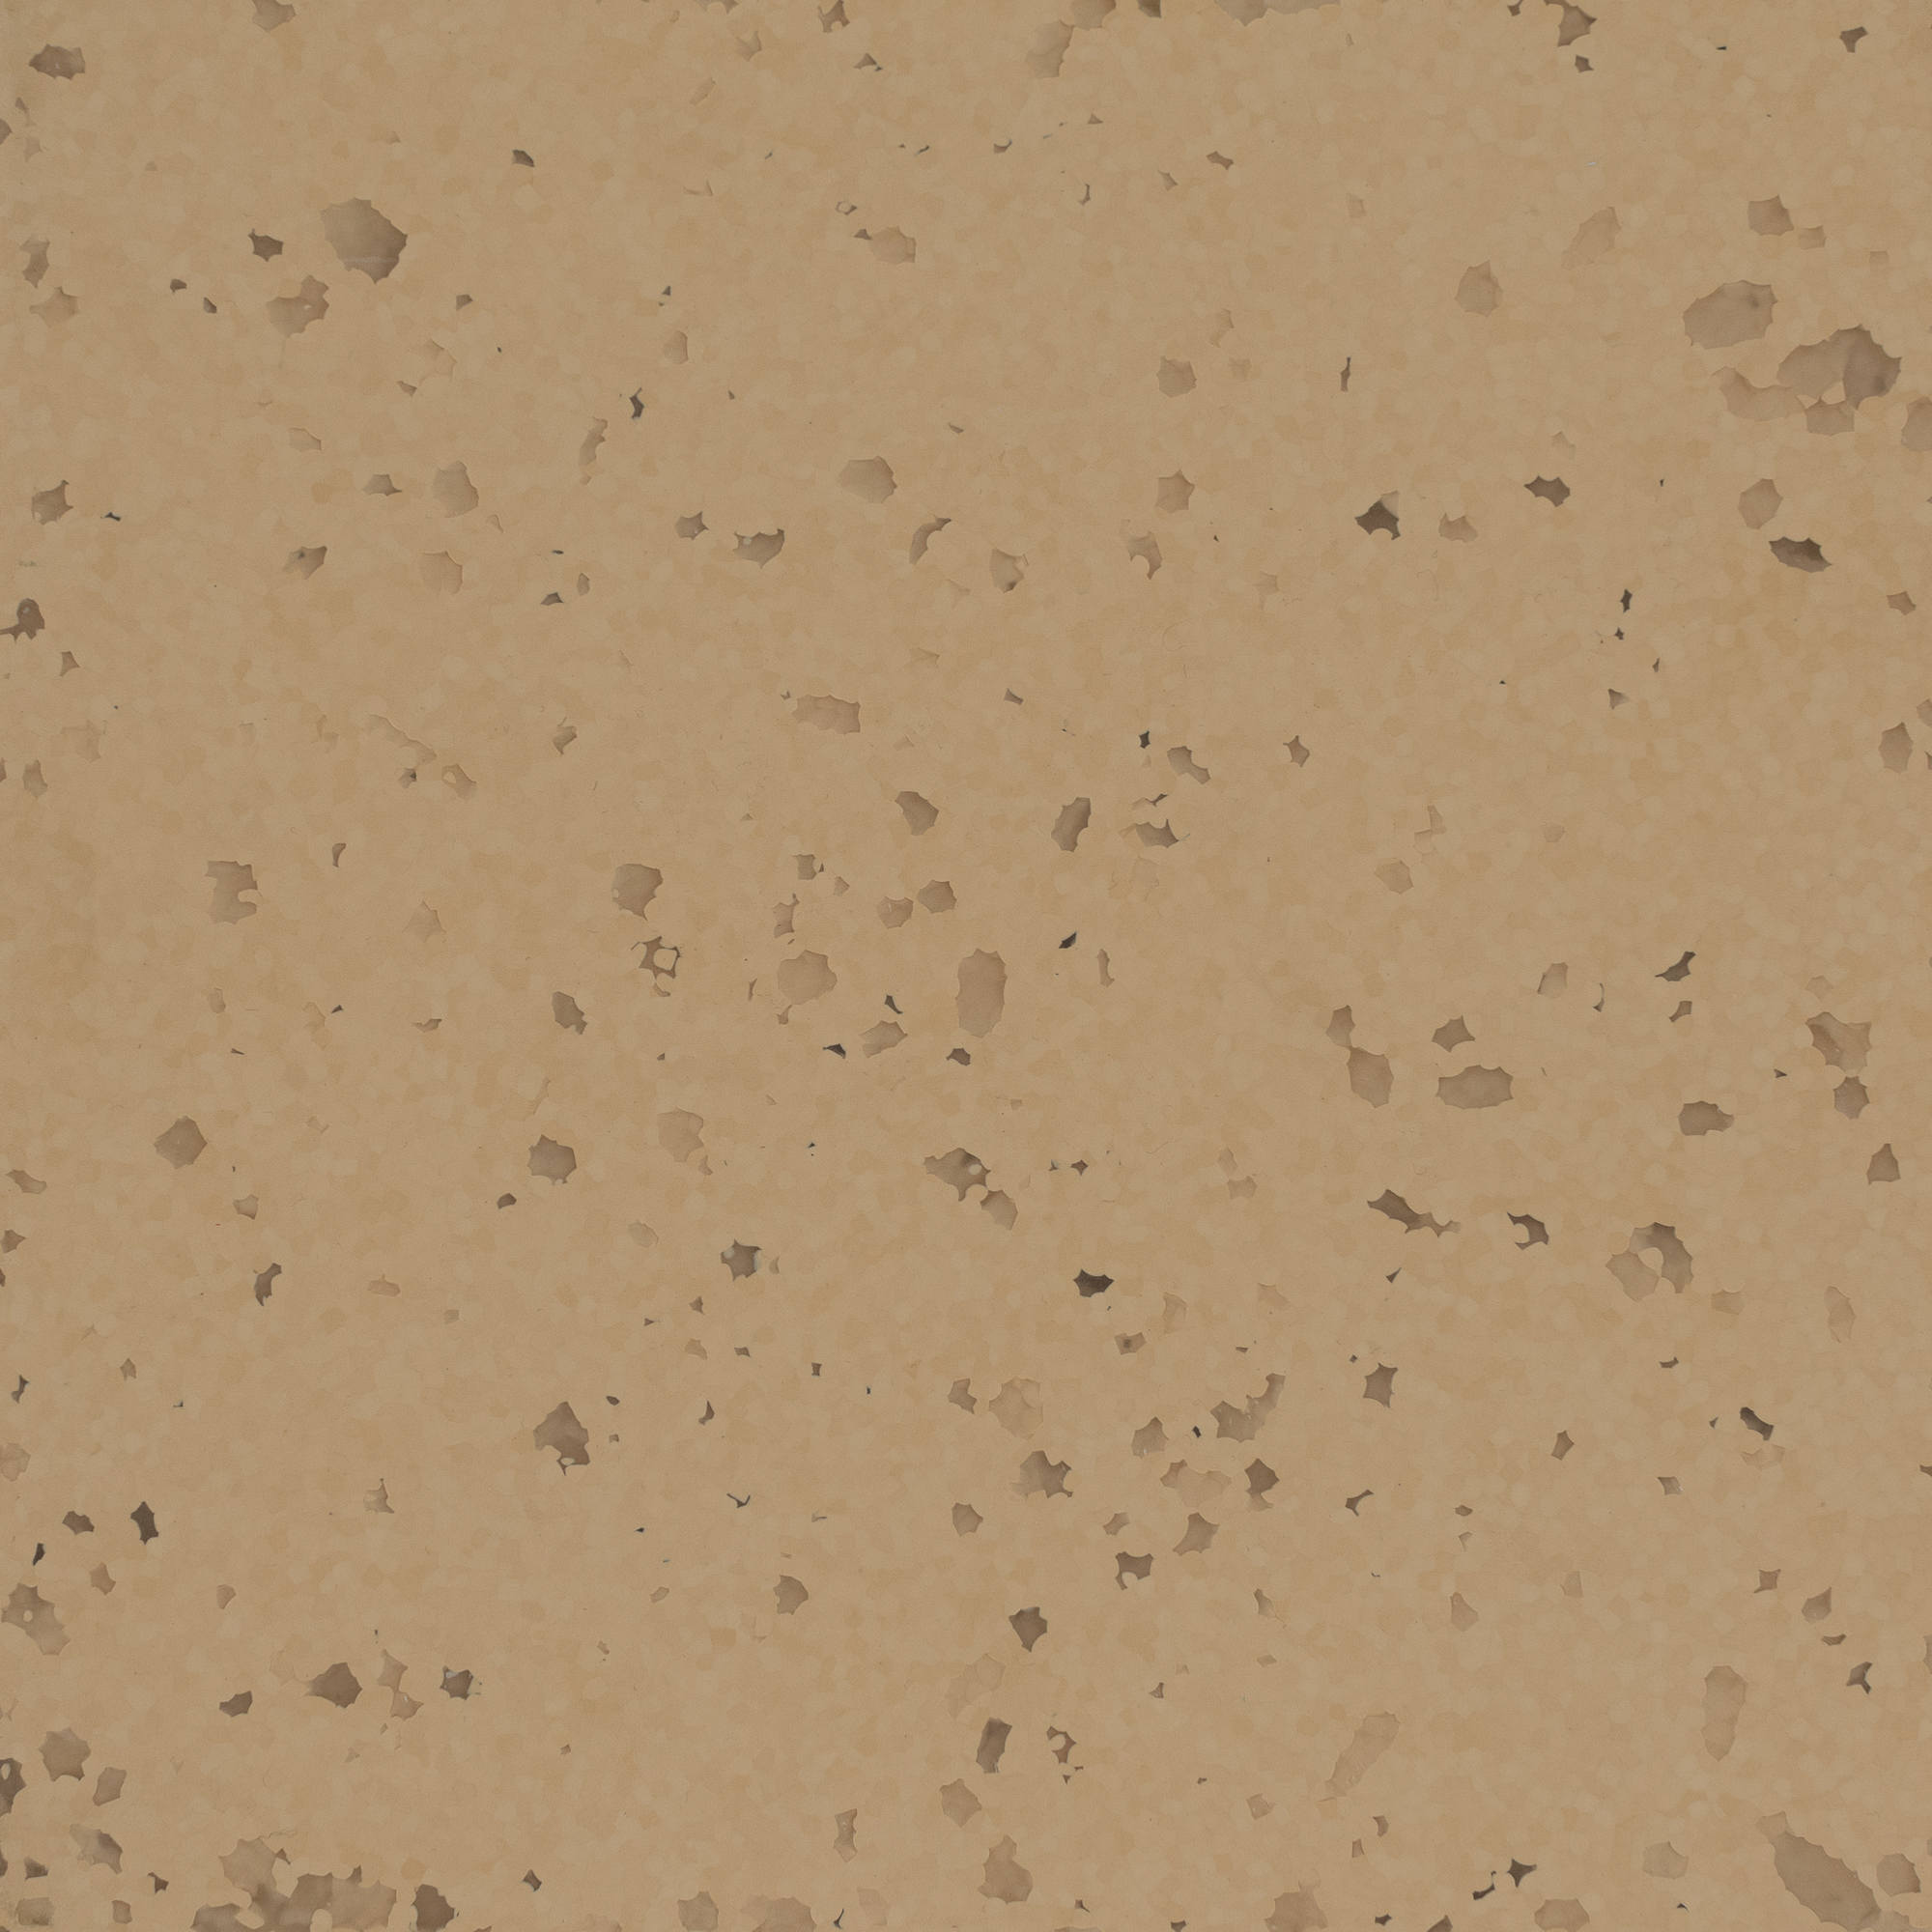 LePave_SoftSurface_PS_BEIGE-Sable Sable  